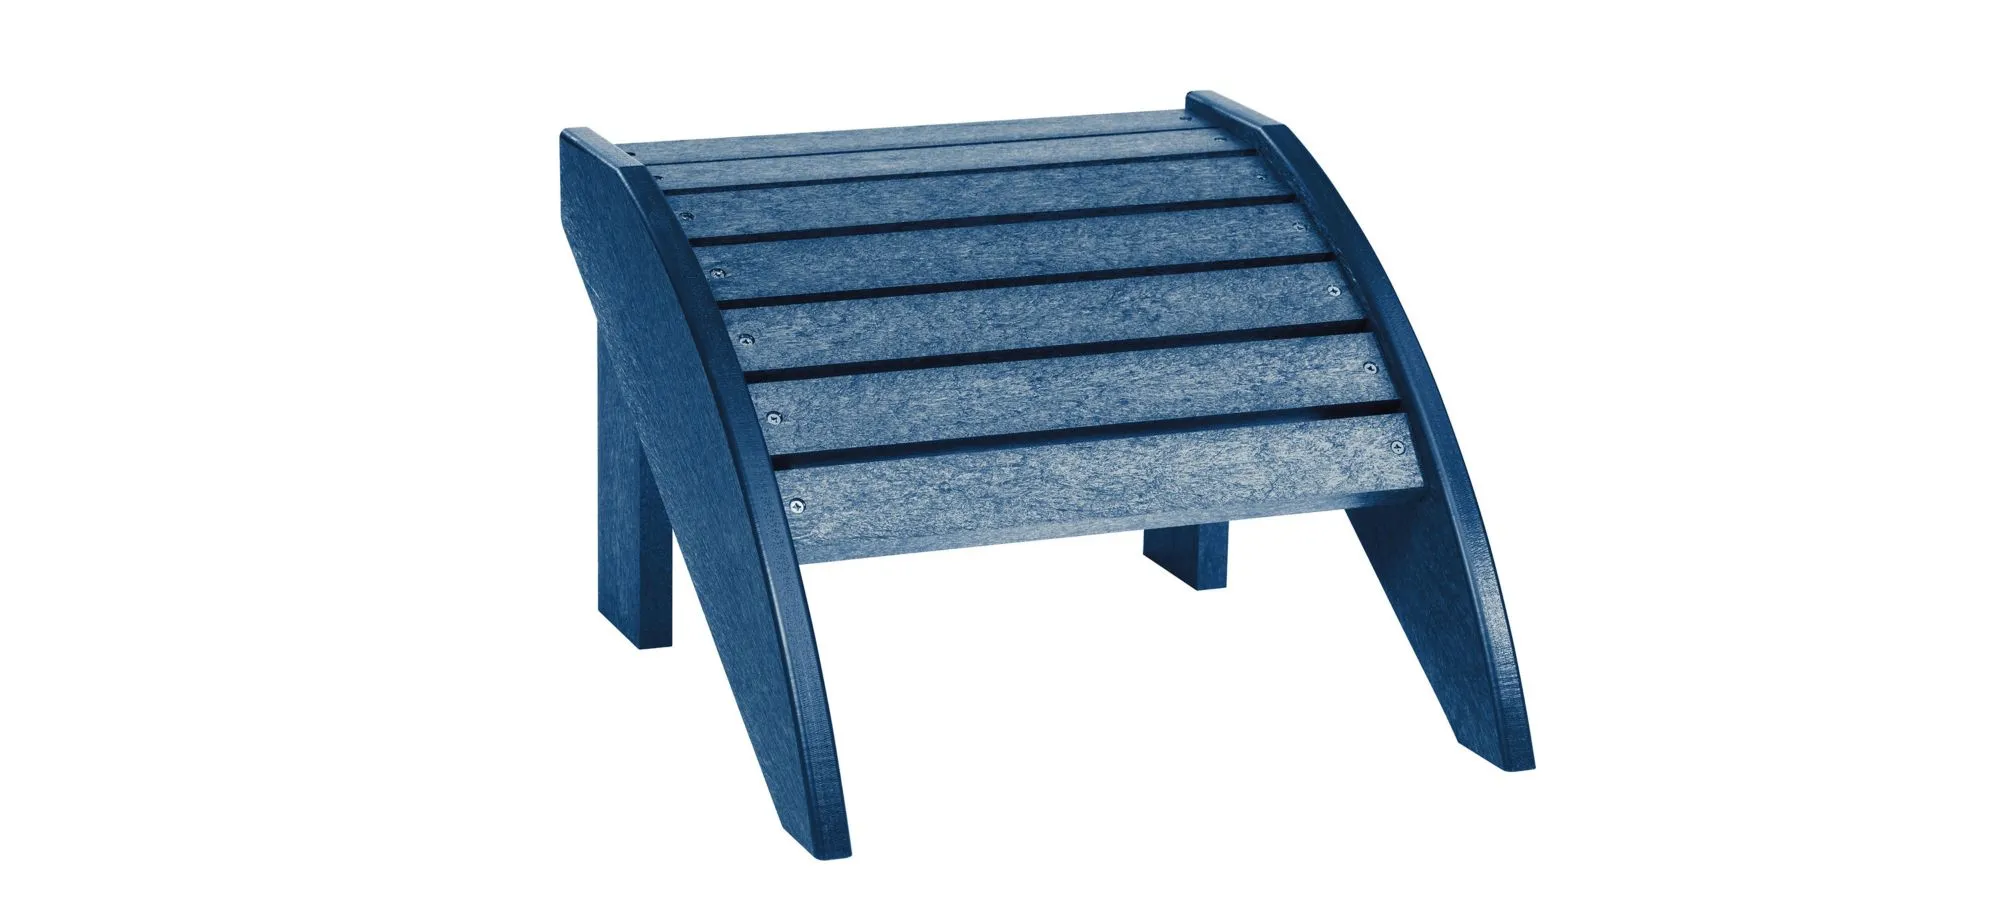 Generation Recycled Outdoor Adirondack Footstool in Navy by C.R. Plastic Products